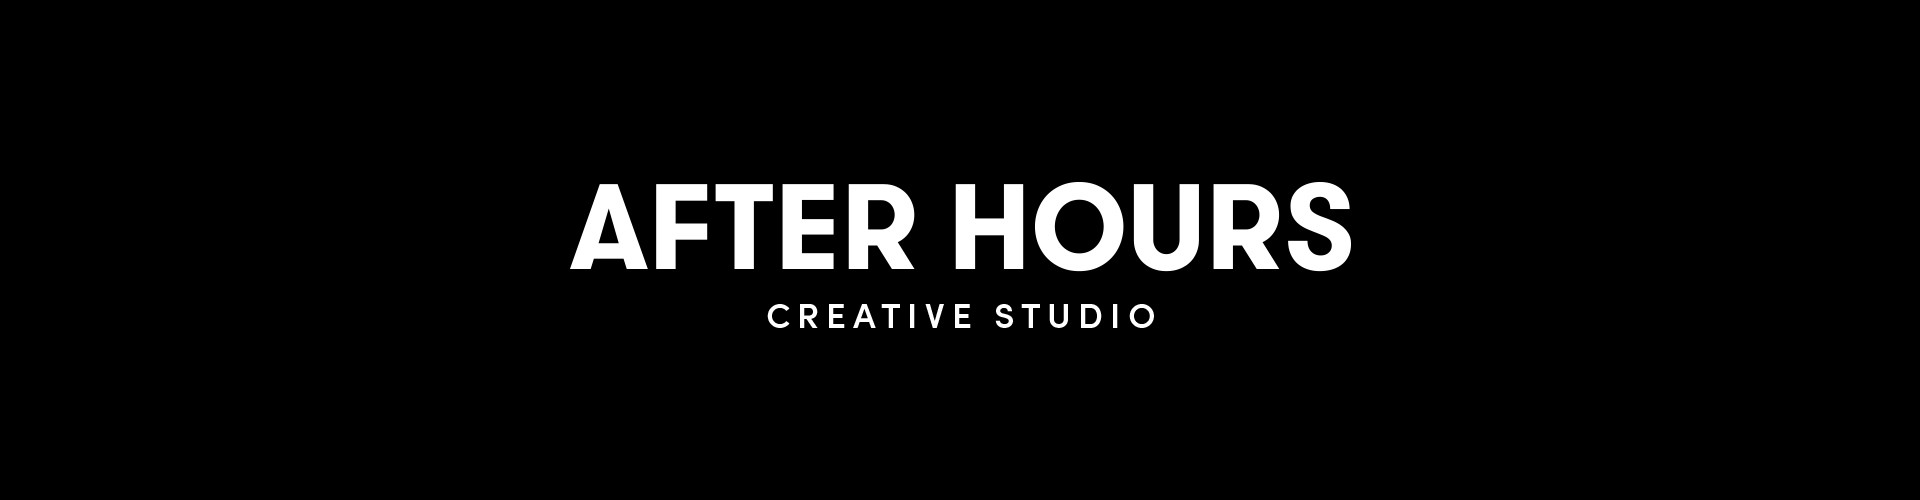 after hours creative banner